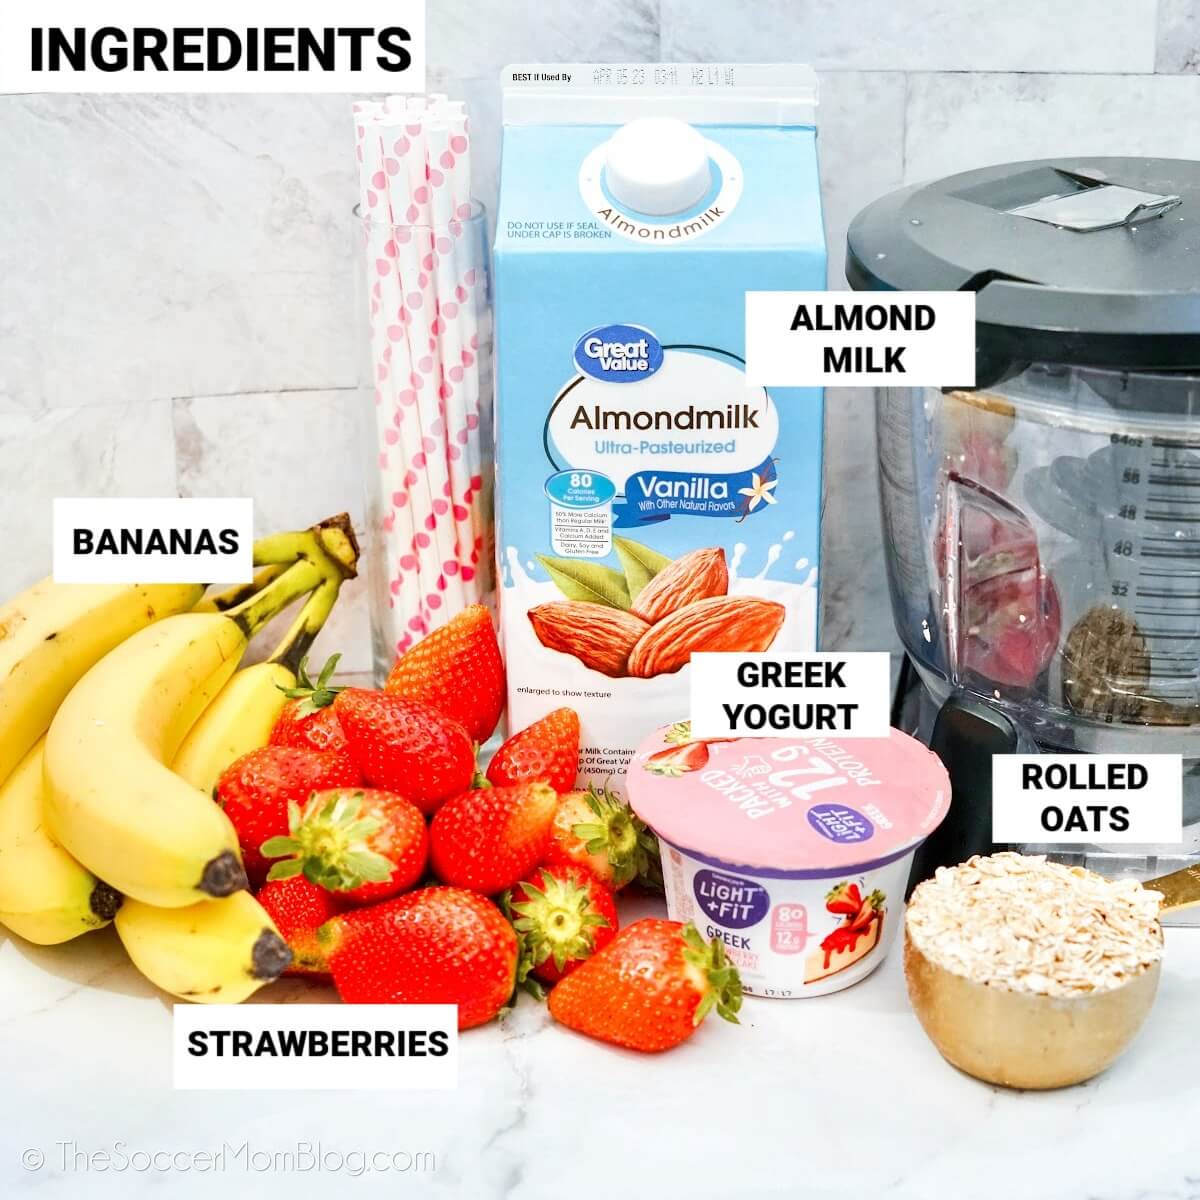 Strawberry Banana Oatmeal Smoothie Ingredients, with text labels